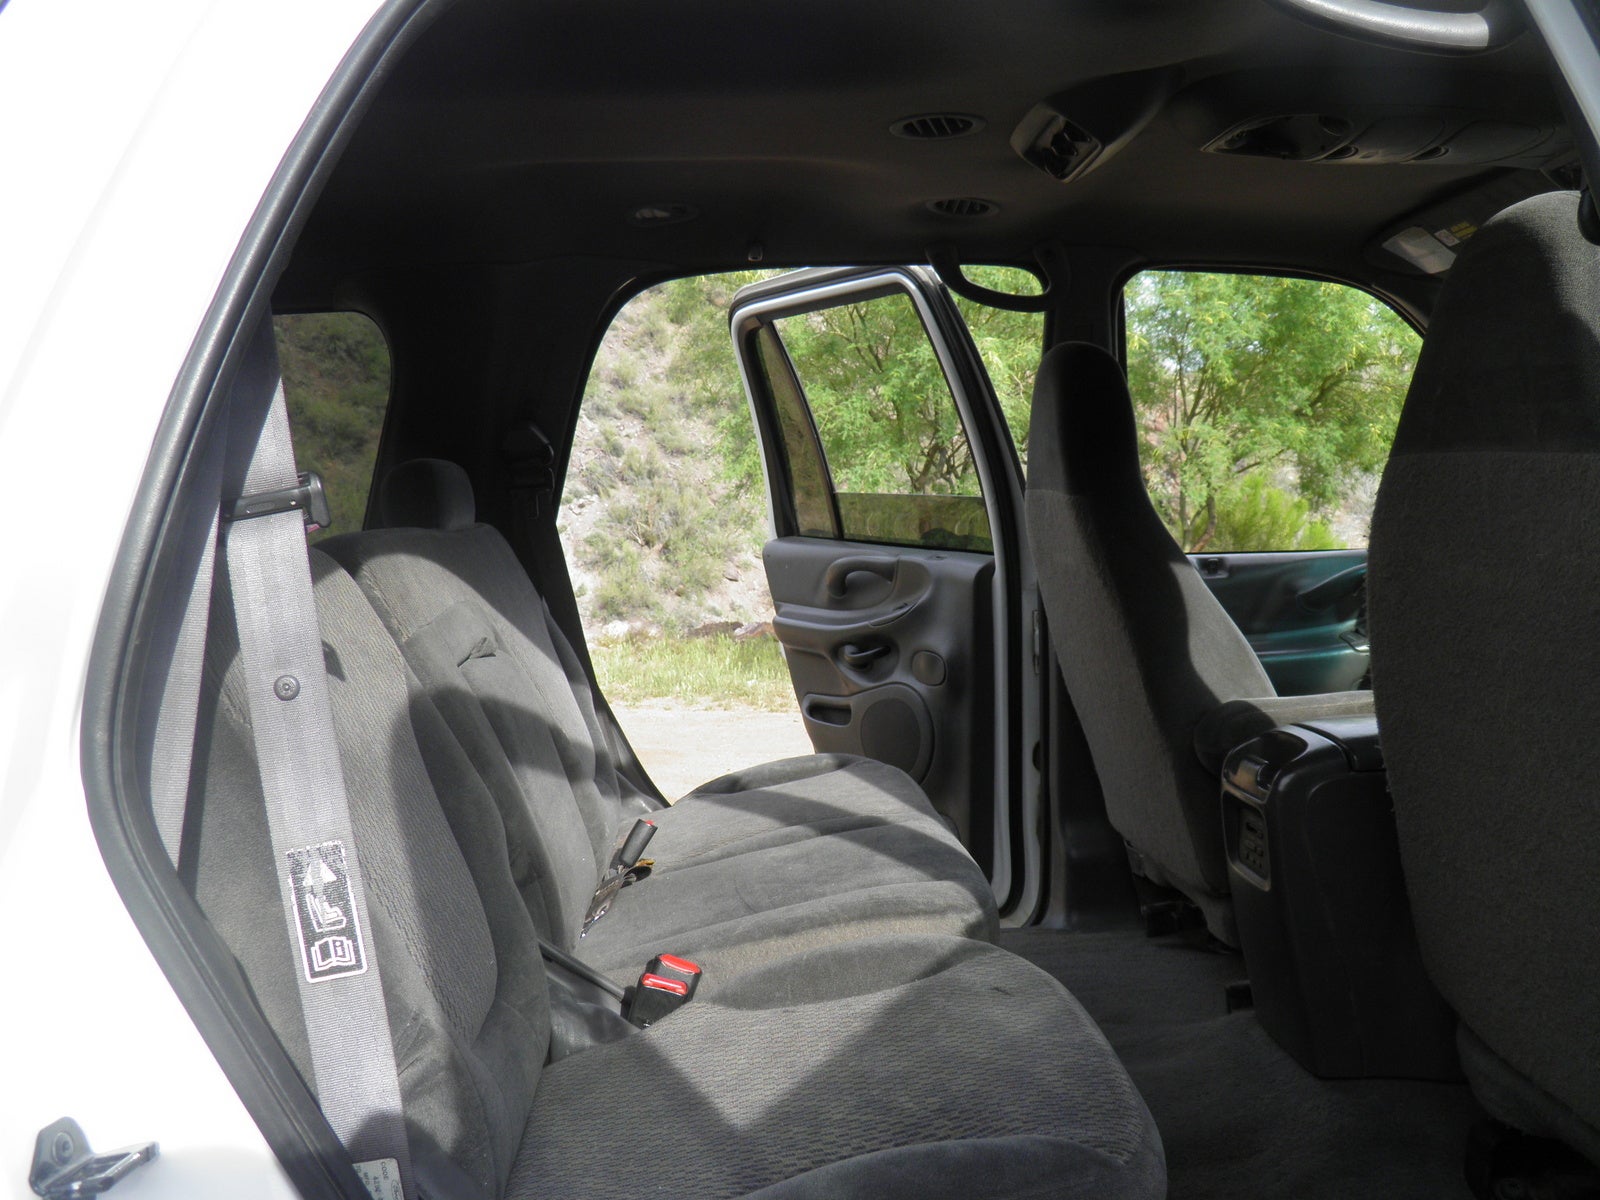 1999 Ford expedition interior dimensions #7